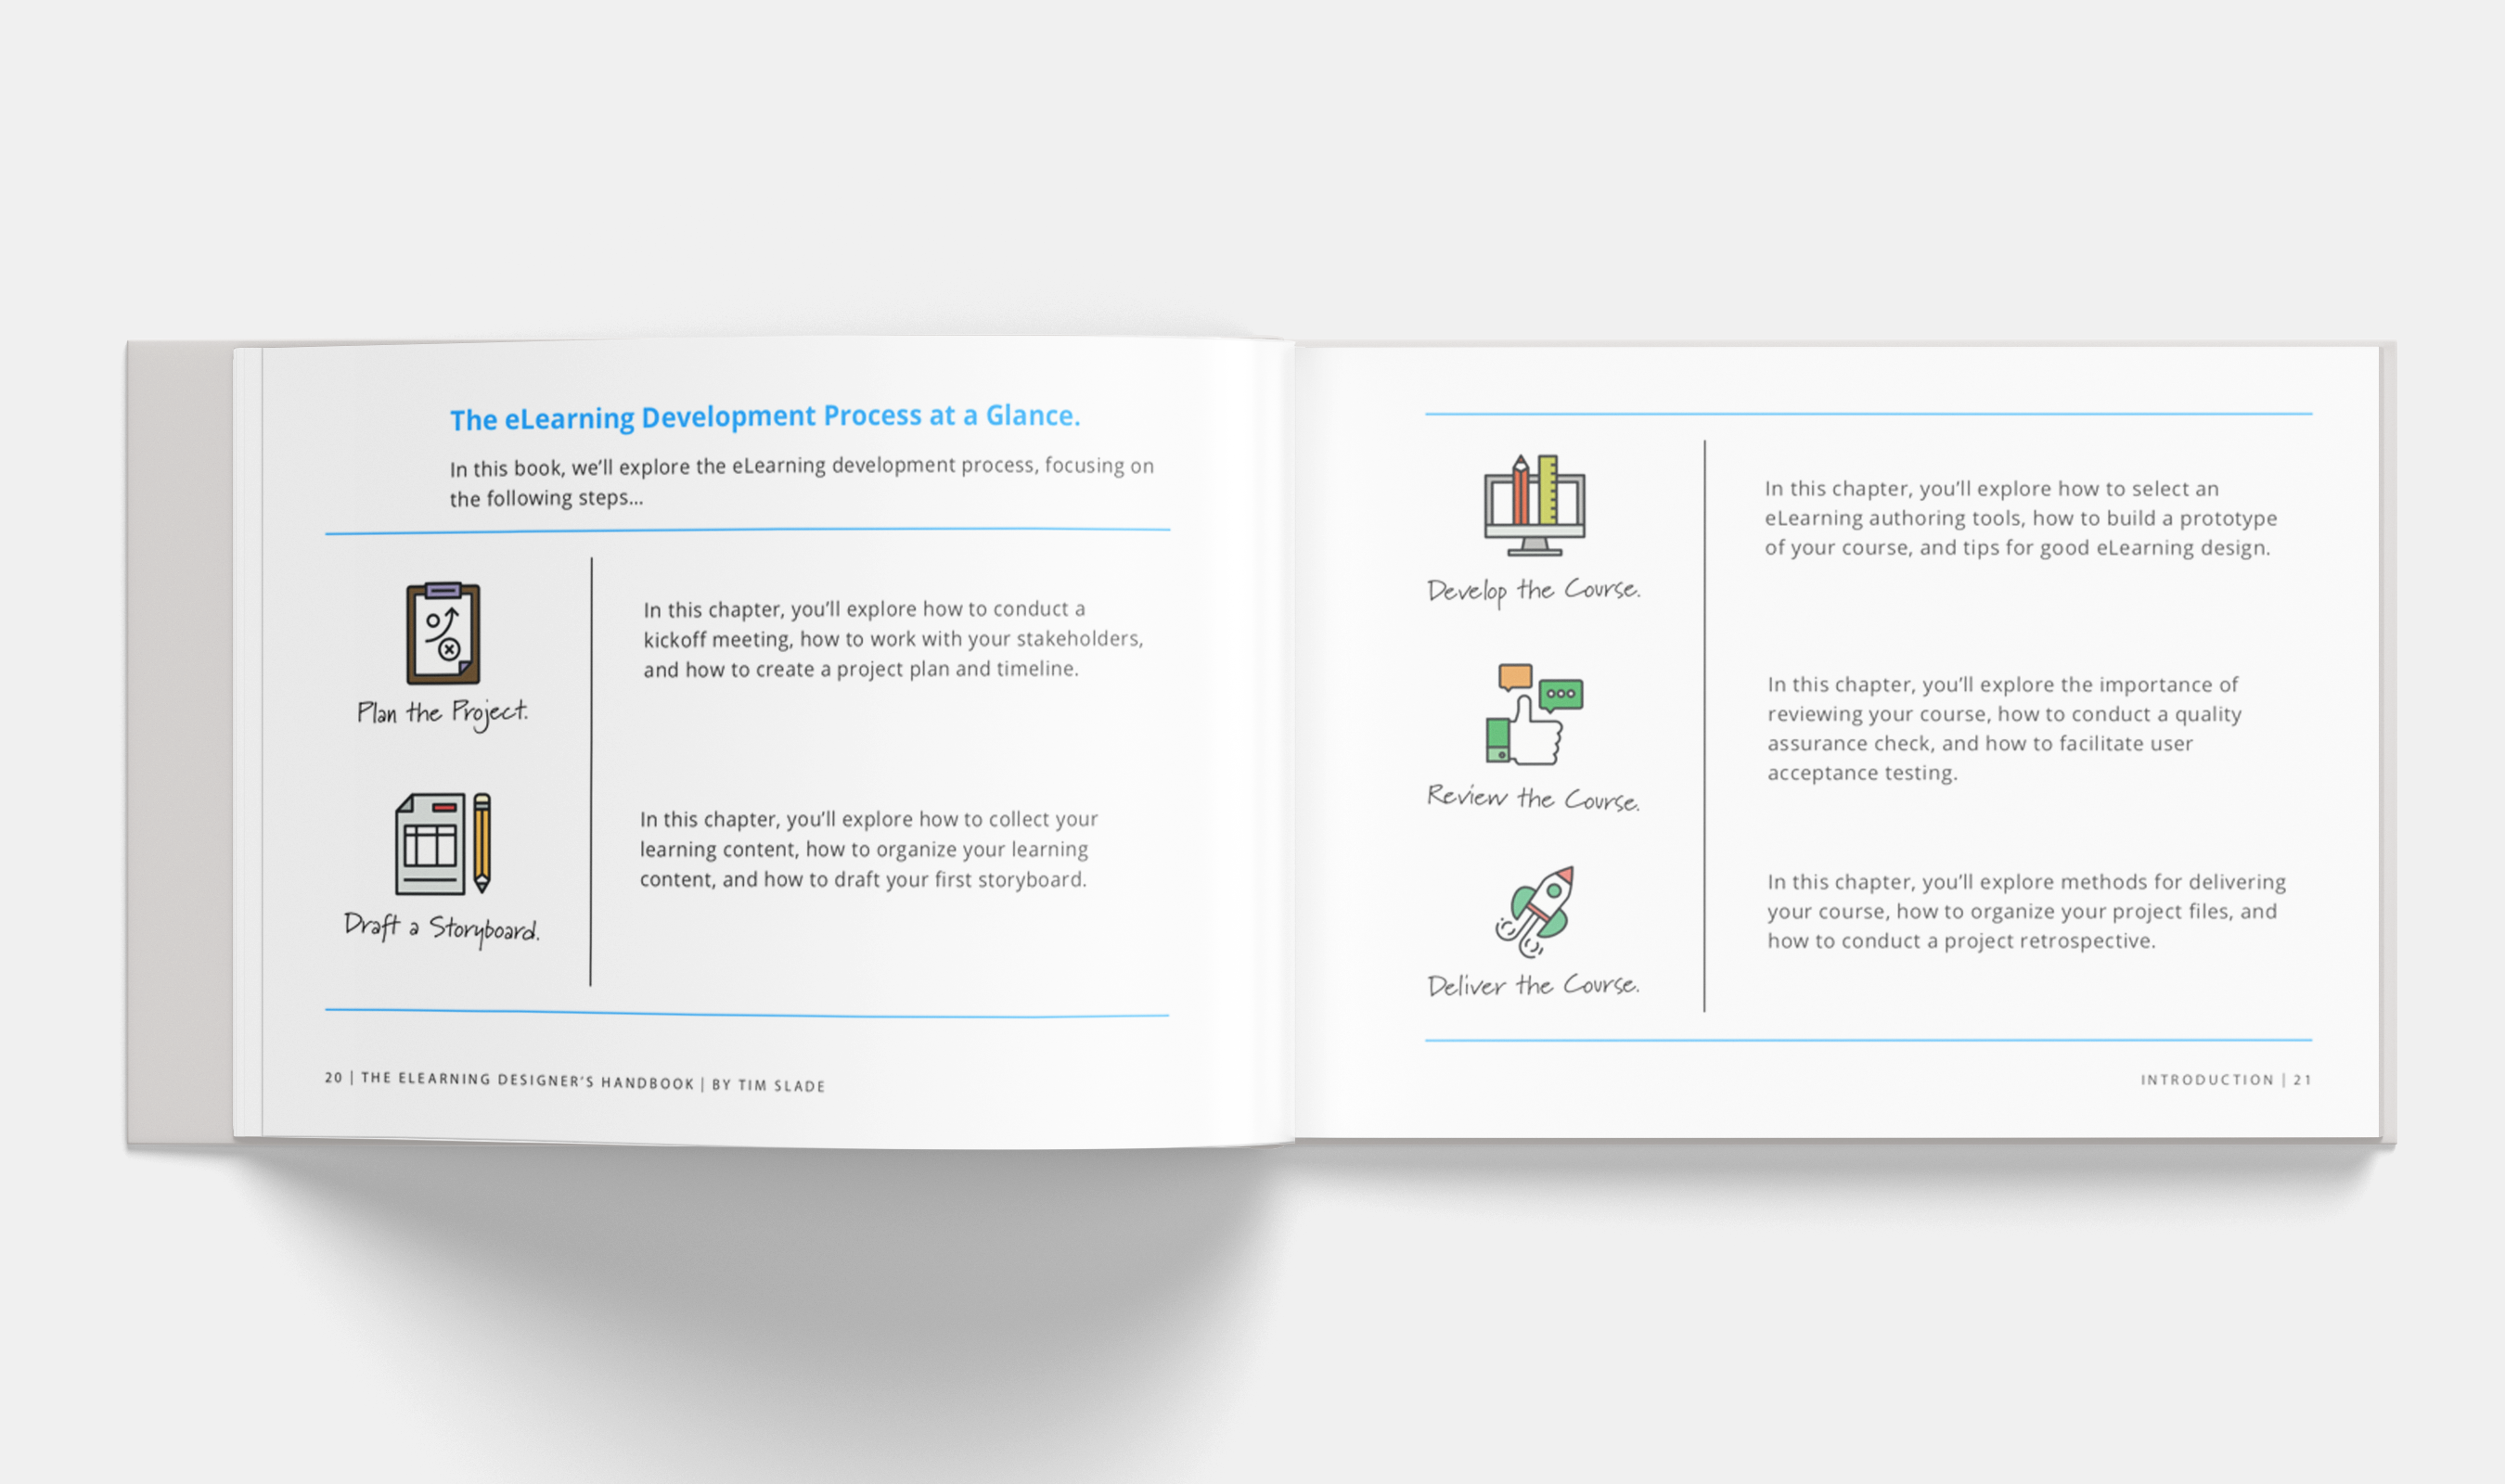 The-eLearning-Designers-Handbook-A-Practical-Guide-to-the-eLearning-Development-Process-for-New-eLearning-Designers